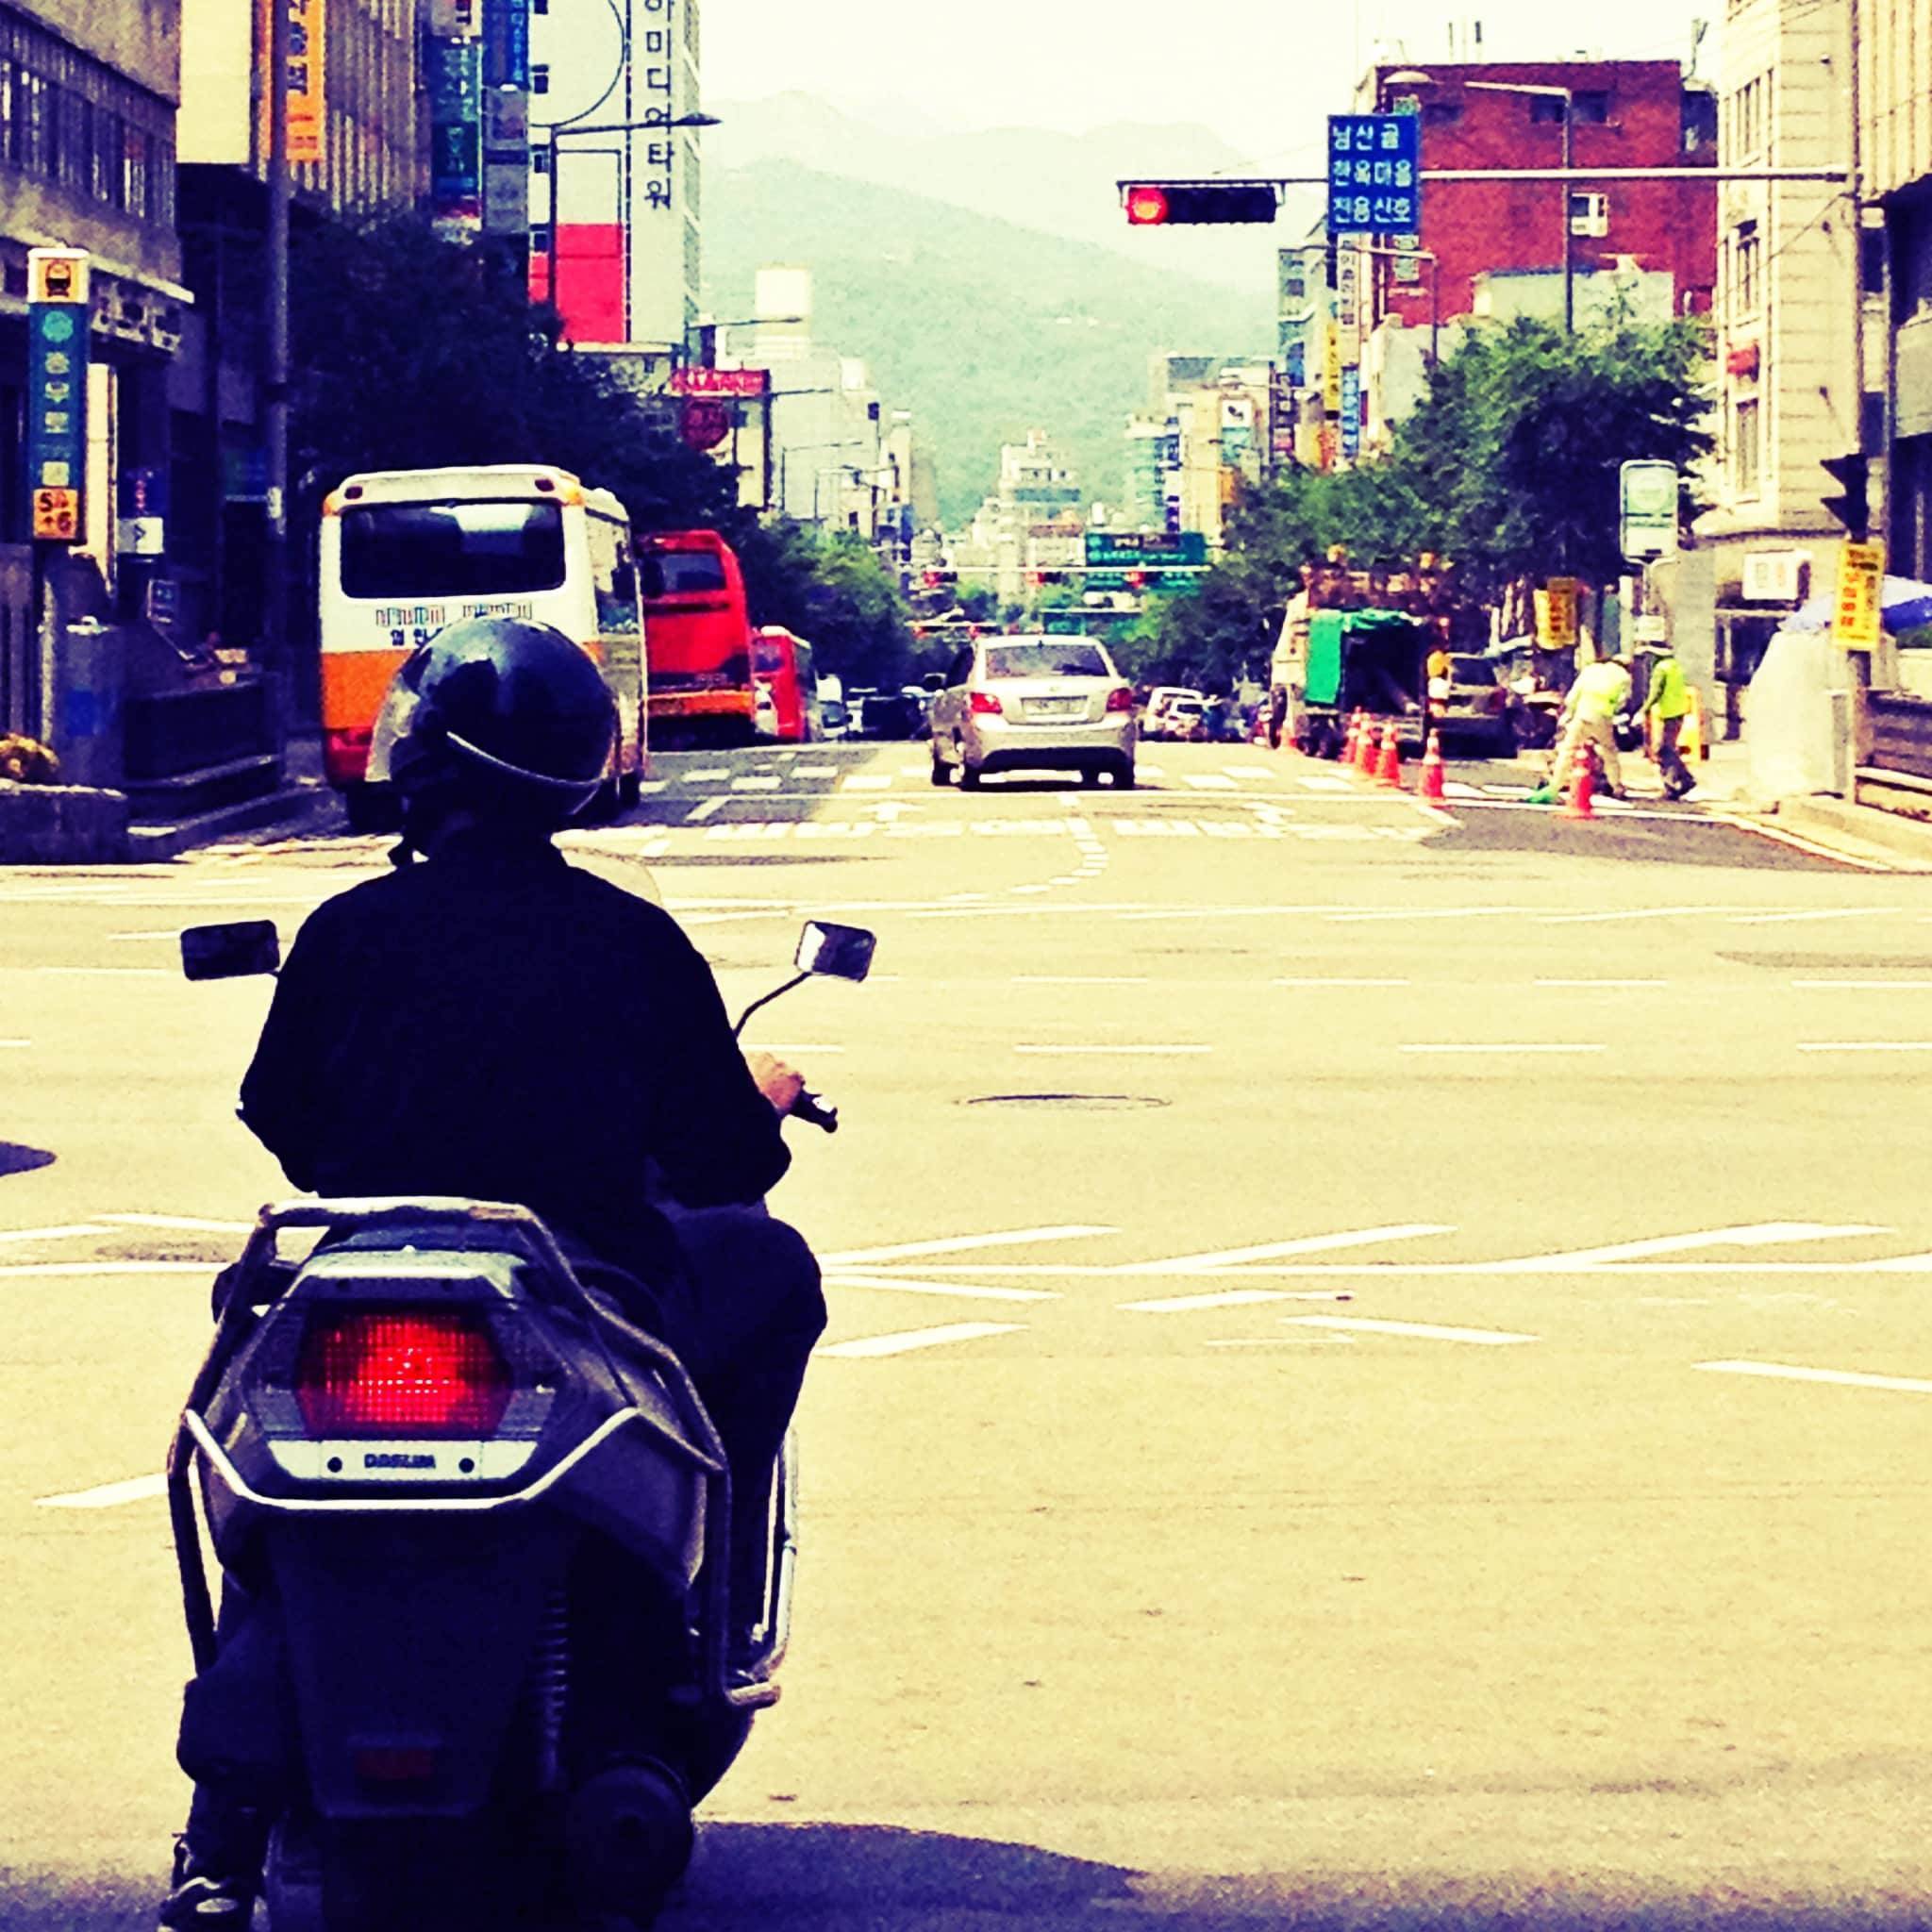 Motorcycle in Seoul.